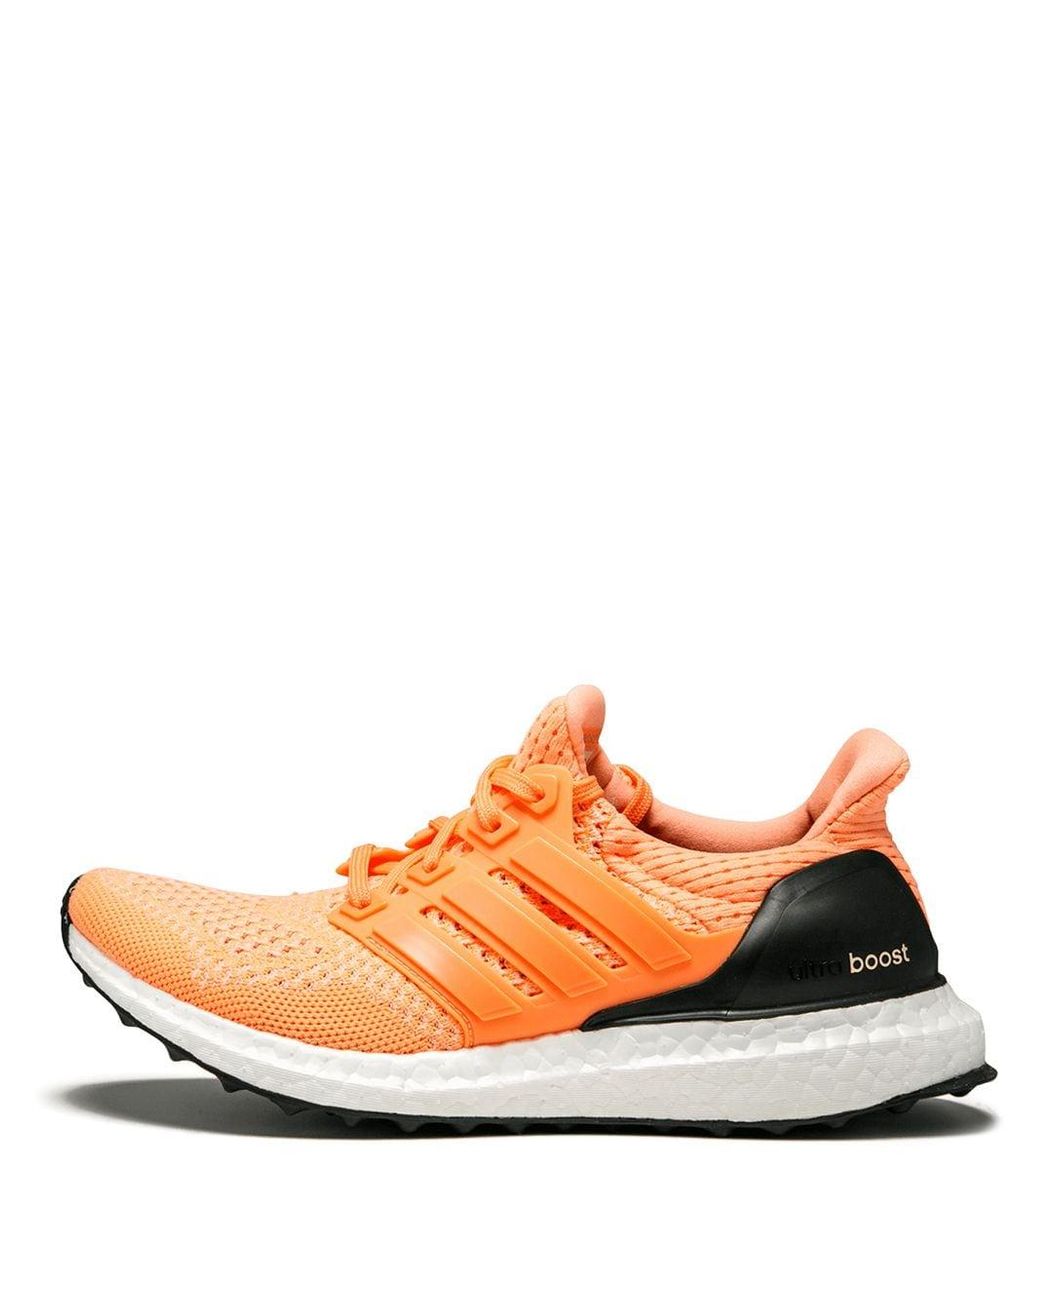 boost trainers womens